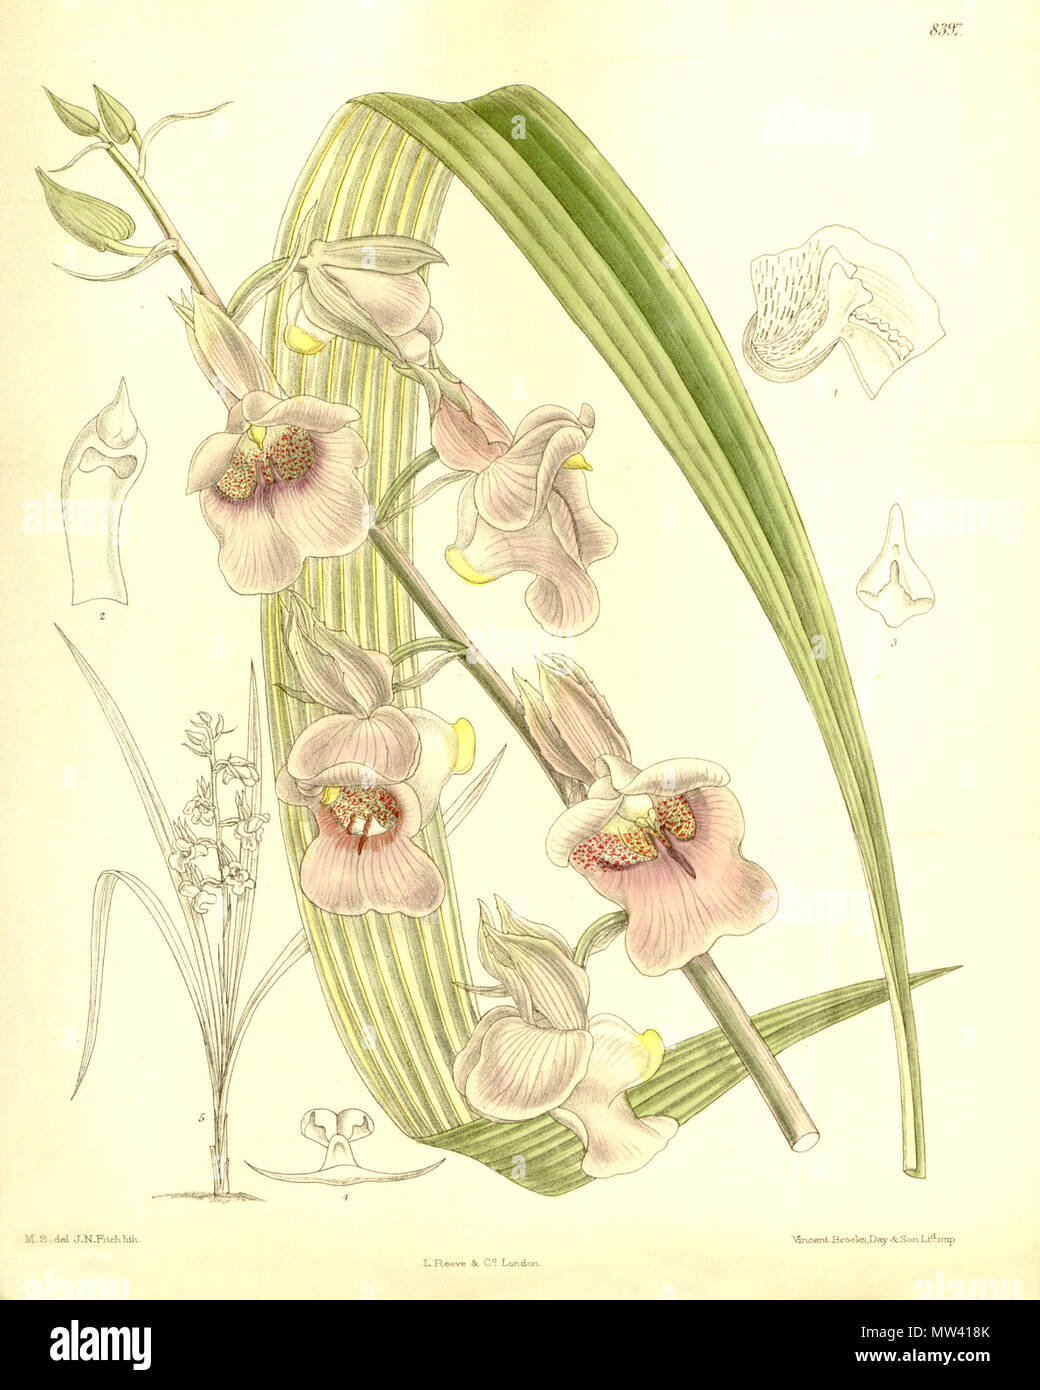 . Illustration of Eulophia cucullata (as syn. Lissochilus stylites) . 1911. M. S. del. ( = Matilda Smith, 1854-1926), J. N. Fitch lith. ( = John Nugent Fitch, 1840–1927) Description by R. A. Rolfe (1855–1921) 198 Eulophia cucullata (as Lissochilus stylites) - Curtis' 137 (Ser. 4 no. 7) pl. 8397 (1911) Stock Photo